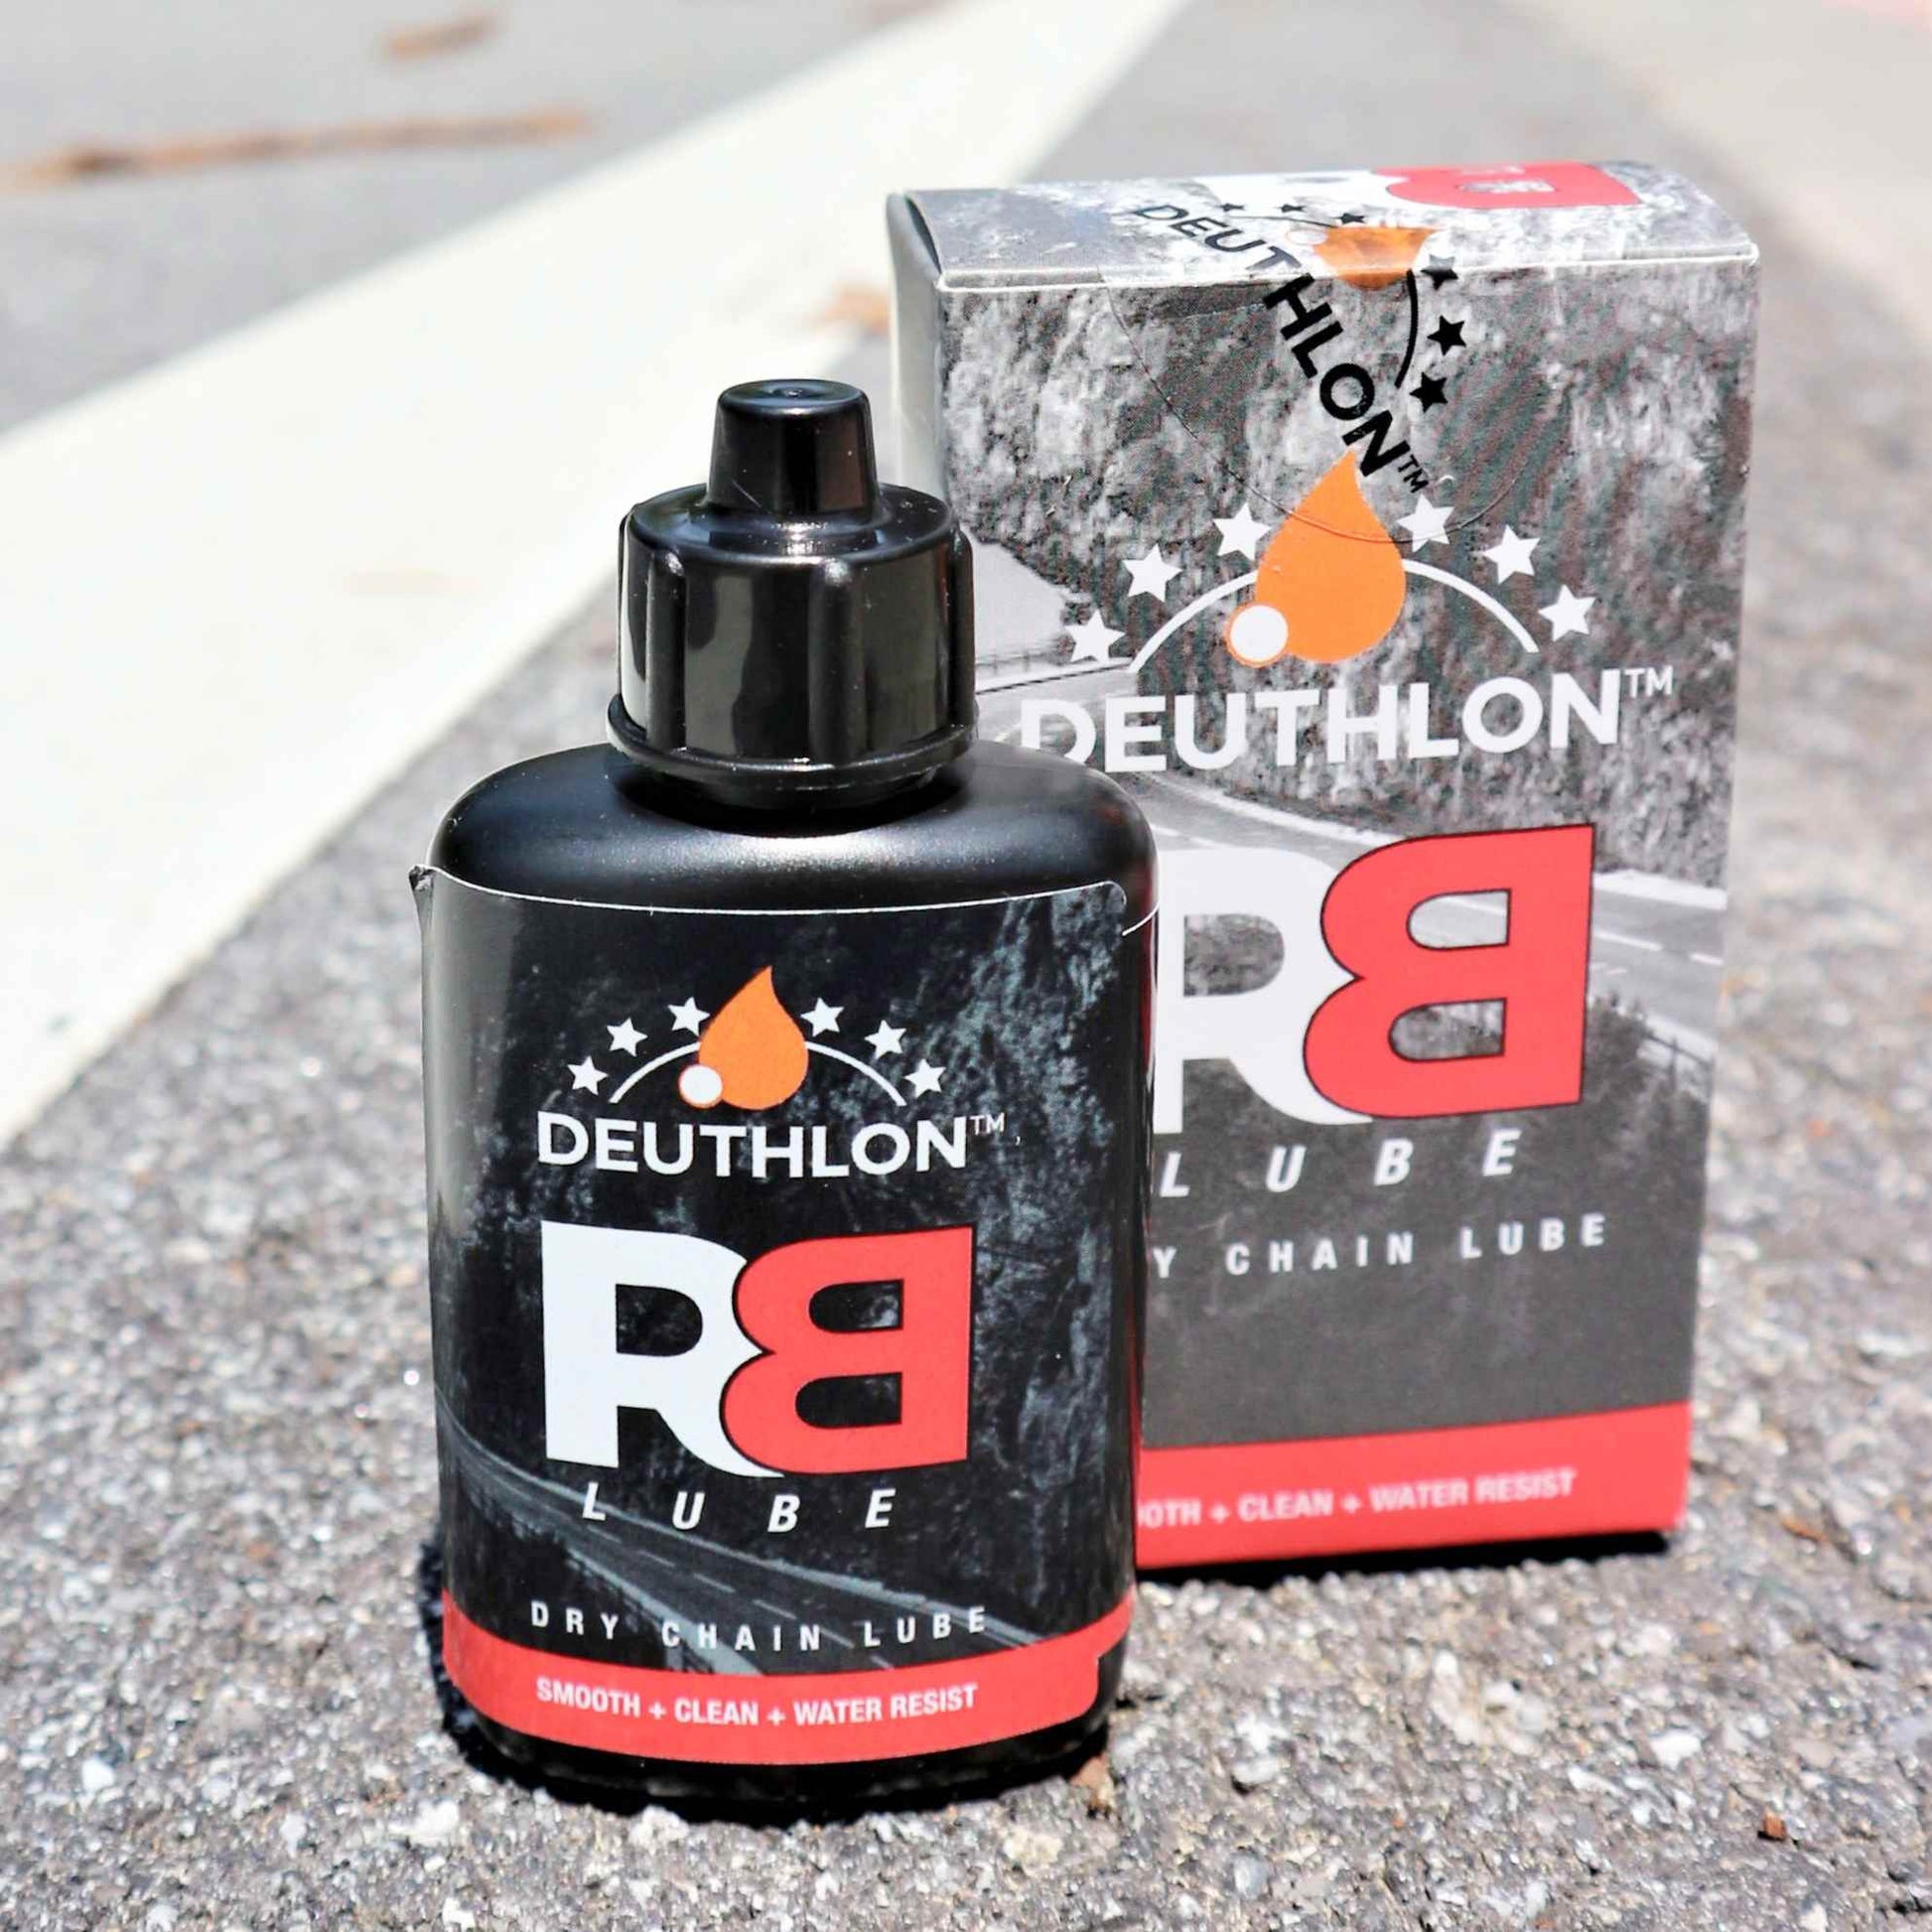 DEUTHLON RB Lube | Up to 5X longer distance for Triathlons and Iron Mans - Deuthlon